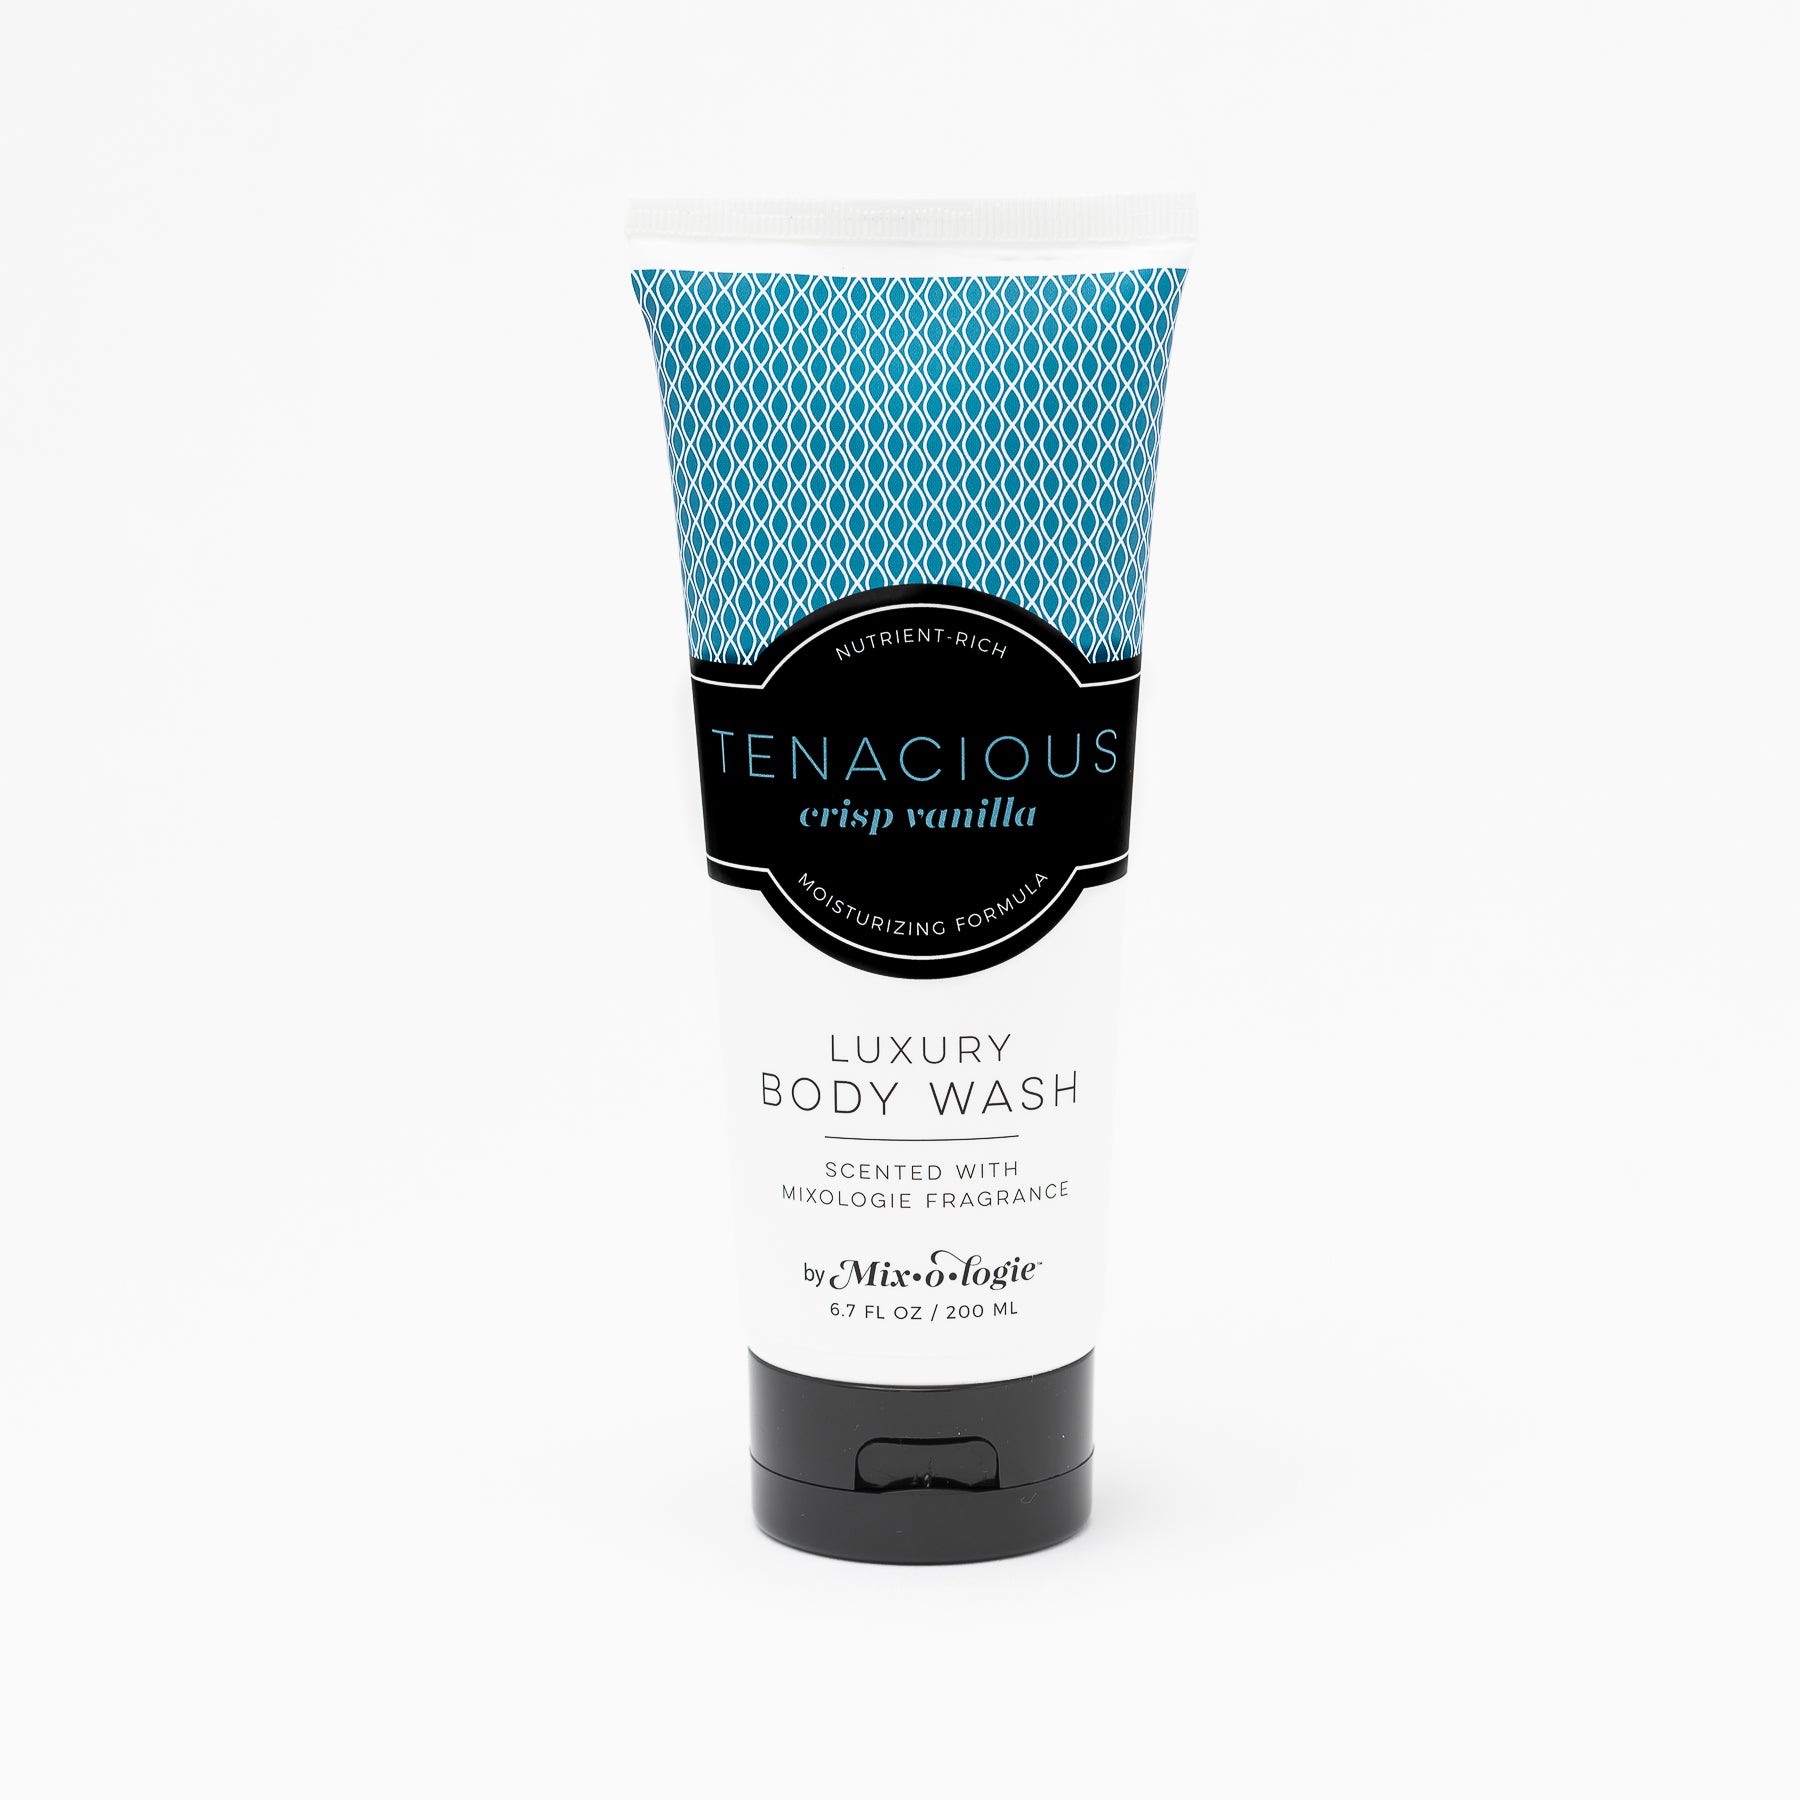 Luxury Body Wash in Mixologie’s Tenacious (Crisp Vanilla) in blue color sample package with black label. Contains 6.7 fl oz or 200 mL pictured on a white background. 